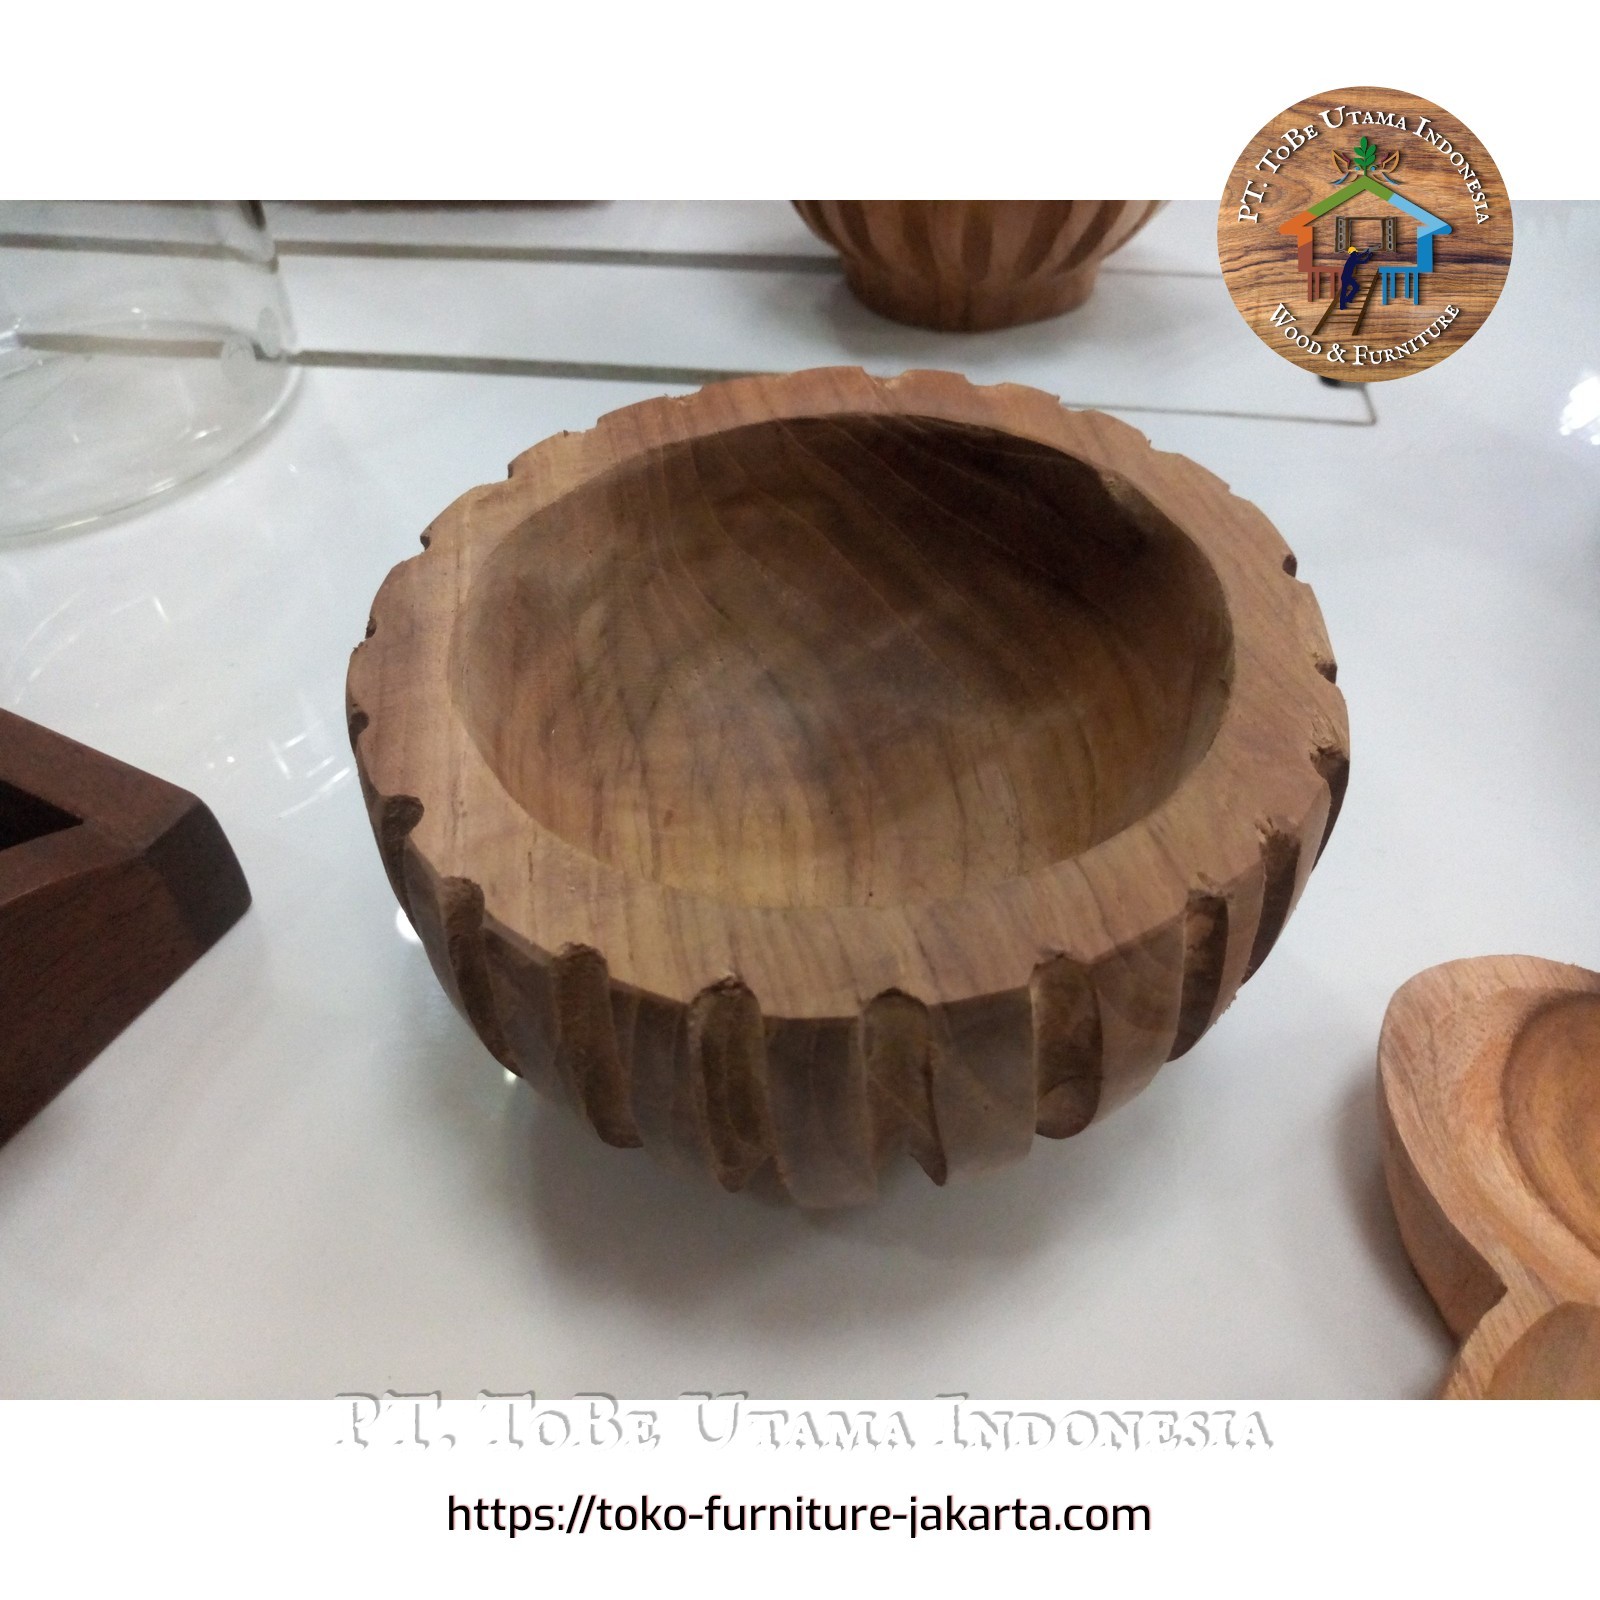 Dining Room: Salur Wooden Bowl (image 1 of 1).